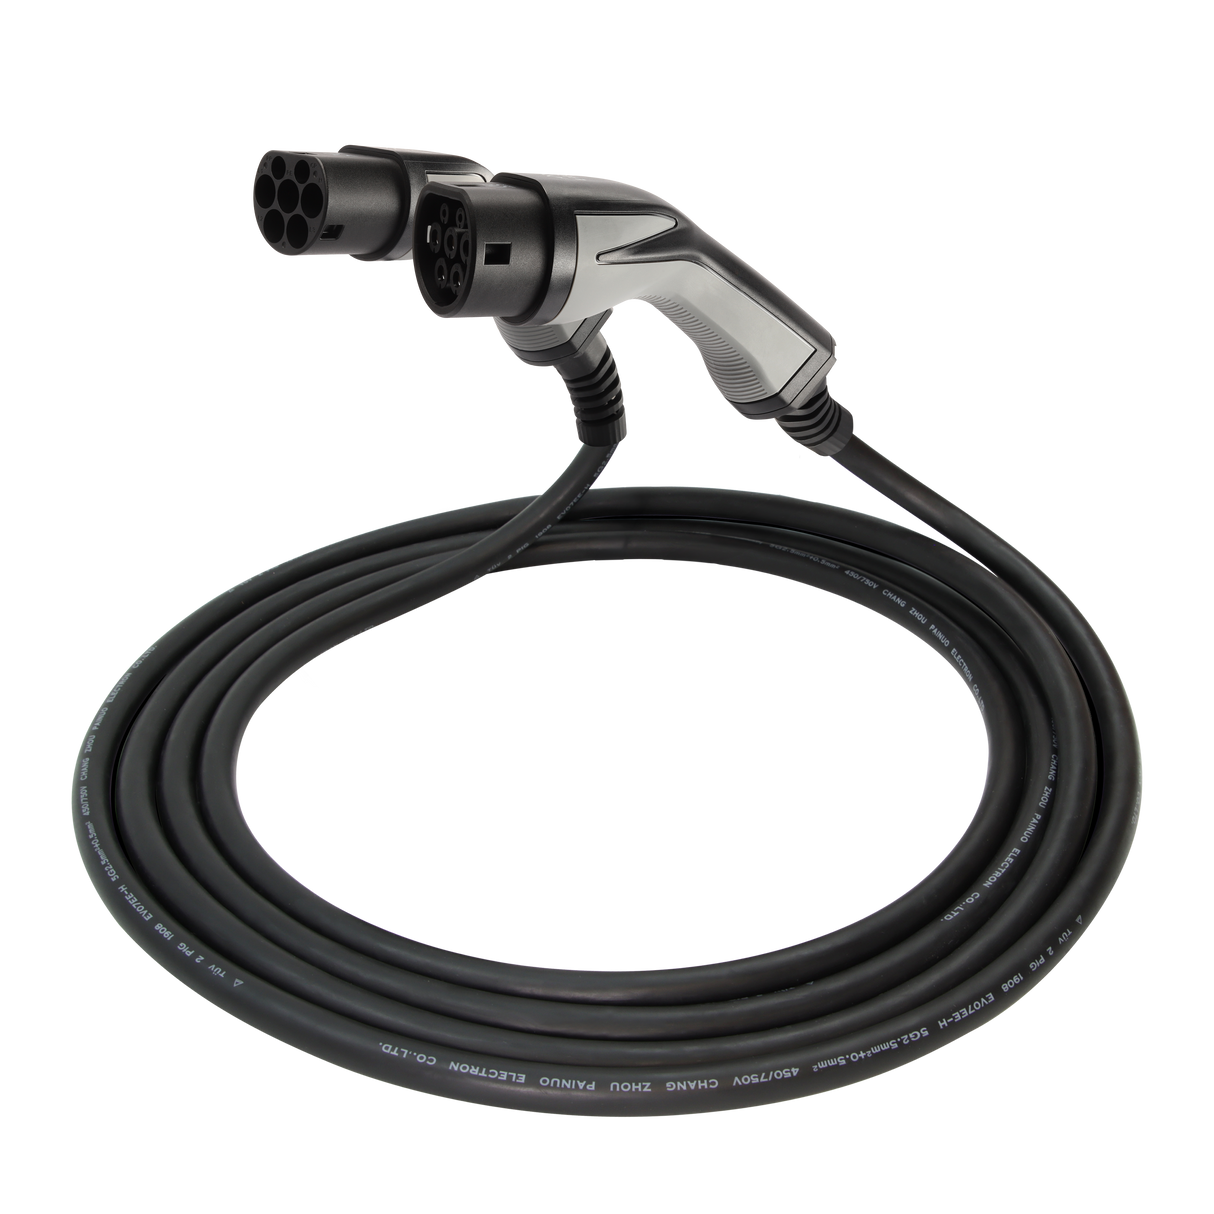 Charging cable Mercedes C -Class - Erock Pro Type 2 - 16A 3 phase (11 kW)